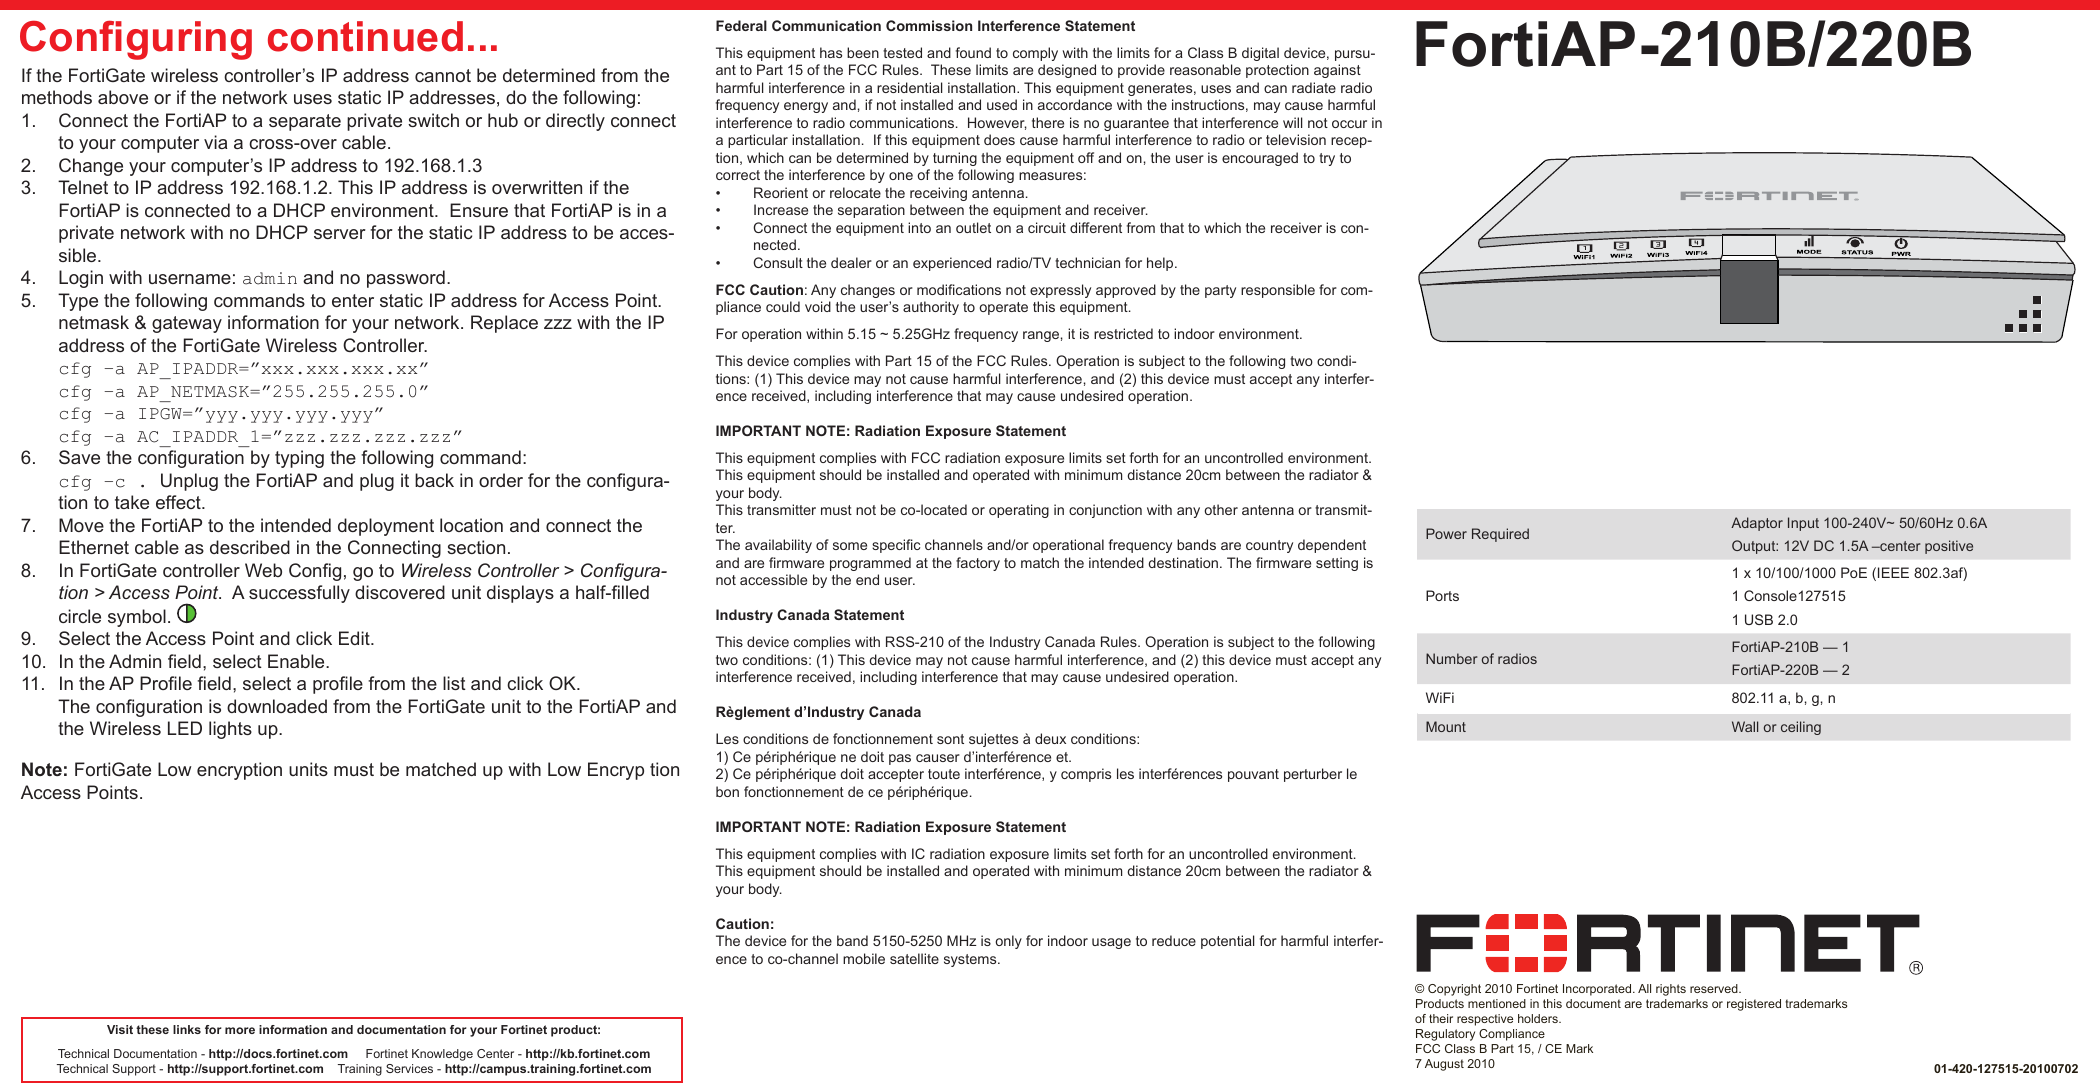 QuickStart Guide© Copyright 2010 Fortinet Incorporated. All rights reserved.  Products mentioned in this document are trademarks or registered trademarks of their respective holders.Regulatory ComplianceFCC Class B Part 15, / CE Mark7 August 2010FortiAP-210B/220B01-420-127515-20100702Visit these links for more information and documentation for your Fortinet product:Technical Documentation - http://docs.fortinet.com     Fortinet Knowledge Center - http://kb.fortinet.comTechnical Support - http://support.fortinet.com    Training Services - http://campus.training.fortinet.comIf the FortiGate wireless controller’s IP address cannot be determined from the methods above or if the network uses static IP addresses, do the following:1.  Connect the FortiAP to a separate private switch or hub or directly connect to your computer via a cross-over cable. 2.  Change your computer’s IP address to 192.168.1.33.  Telnet to IP address 192.168.1.2. This IP address is overwritten if the FortiAP is connected to a DHCP environment.  Ensure that FortiAP is in a private network with no DHCP server for the static IP address to be acces-sible.4.  Login with username: admin and no password.5.  Type the following commands to enter static IP address for Access Point. netmask &amp; gateway information for your network. Replace zzz with the IP address of the FortiGate Wireless Controller.cfg –a AP_IPADDR=”xxx.xxx.xxx.xx”cfg –a AP_NETMASK=”255.255.255.0”cfg –a IPGW=”yyy.yyy.yyy.yyy”cfg –a AC_IPADDR_1=”zzz.zzz.zzz.zzz”6.  Save the conguration by typing the following command:cfg –c . Unplug the FortiAP and plug it back in order for the congura-tion to take effect.7.  Move the FortiAP to the intended deployment location and connect the Ethernet cable as described in the Connecting section.8.  In FortiGate controller Web Cong, go to Wireless Controller &gt; Congura-tion &gt; Access Point.  A successfully discovered unit displays a half-lled circle symbol.   9.  Select the Access Point and click Edit. 10.  In the Admin eld, select Enable.  11.  In the AP Prole eld, select a prole from the list and click OK.The conguration is downloaded from the FortiGate unit to the FortiAP and the Wireless LED lights up. Note: FortiGate Low encryption units must be matched up with Low Encryp tion Access Points.Power Required Adaptor Input 100-240V~ 50/60Hz 0.6AOutput: 12V DC 1.5A –center positivePorts1 x 10/100/1000 PoE (IEEE 802.3af)1 Console1275151 USB 2.0Number of radios FortiAP-210B — 1FortiAP-220B — 2WiFi 802.11 a, b, g, nMount Wall or ceilingConguring continued... Federal Communication Commission Interference StatementThis equipment has been tested and found to comply with the limits for a Class B digital device, pursu-ant to Part 15 of the FCC Rules.  These limits are designed to provide reasonable protection against harmful interference in a residential installation. This equipment generates, uses and can radiate radio frequency energy and, if not installed and used in accordance with the instructions, may cause harmful interference to radio communications.  However, there is no guarantee that interference will not occur in a particular installation.  If this equipment does cause harmful interference to radio or television recep-tion, which can be determined by turning the equipment off and on, the user is encouraged to try to correct the interference by one of the following measures:•  Reorient or relocate the receiving antenna.•  Increase the separation between the equipment and receiver.•  Connect the equipment into an outlet on a circuit different from that to which the receiver is con-nected.•  Consult the dealer or an experienced radio/TV technician for help.FCC Caution: Any changes or modications not expressly approved by the party responsible for com-pliance could void the user’s authority to operate this equipment.For operation within 5.15 ~ 5.25GHz frequency range, it is restricted to indoor environment.This device complies with Part 15 of the FCC Rules. Operation is subject to the following two condi-tions: (1) This device may not cause harmful interference, and (2) this device must accept any interfer-ence received, including interference that may cause undesired operation.IMPORTANT NOTE: Radiation Exposure StatementThis equipment complies with FCC radiation exposure limits set forth for an uncontrolled environment. This equipment should be installed and operated with minimum distance 20cm between the radiator &amp; your body.This transmitter must not be co-located or operating in conjunction with any other antenna or transmit-ter.The availability of some specic channels and/or operational frequency bands are country dependent and are rmware programmed at the factory to match the intended destination. The rmware setting is not accessible by the end user. Industry Canada StatementThis device complies with RSS-210 of the Industry Canada Rules. Operation is subject to the following two conditions: (1) This device may not cause harmful interference, and (2) this device must accept any interference received, including interference that may cause undesired operation. Règlement d’Industry Canada Les conditions de fonctionnement sont sujettes à deux conditions:1) Ce périphérique ne doit pas causer d’interférence et.2) Ce périphérique doit accepter toute interférence, y compris les interférences pouvant perturber le bon fonctionnement de ce périphérique. IMPORTANT NOTE: Radiation Exposure StatementThis equipment complies with IC radiation exposure limits set forth for an uncontrolled environment. This equipment should be installed and operated with minimum distance 20cm between the radiator &amp; your body. Caution:The device for the band 5150-5250 MHz is only for indoor usage to reduce potential for harmful interfer-ence to co-channel mobile satellite systems.